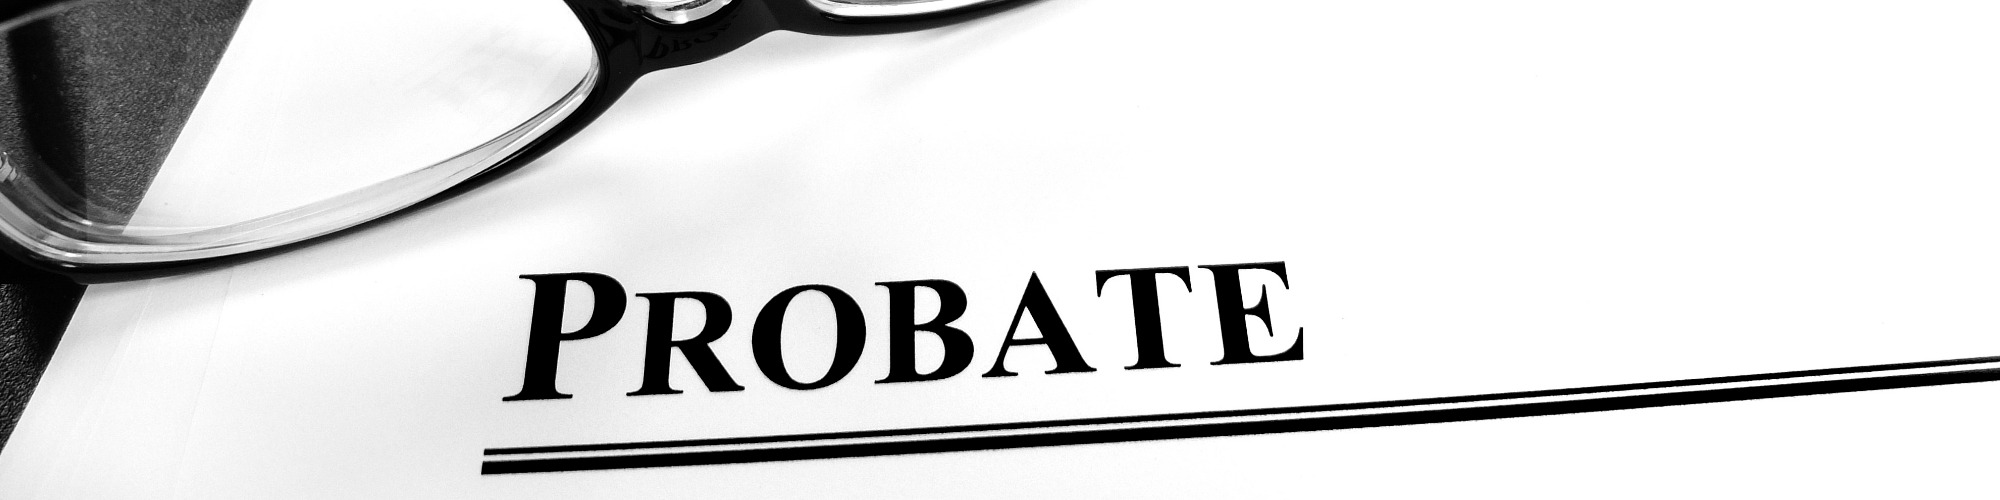 Grants of Probate & Letters of Administration - An Update